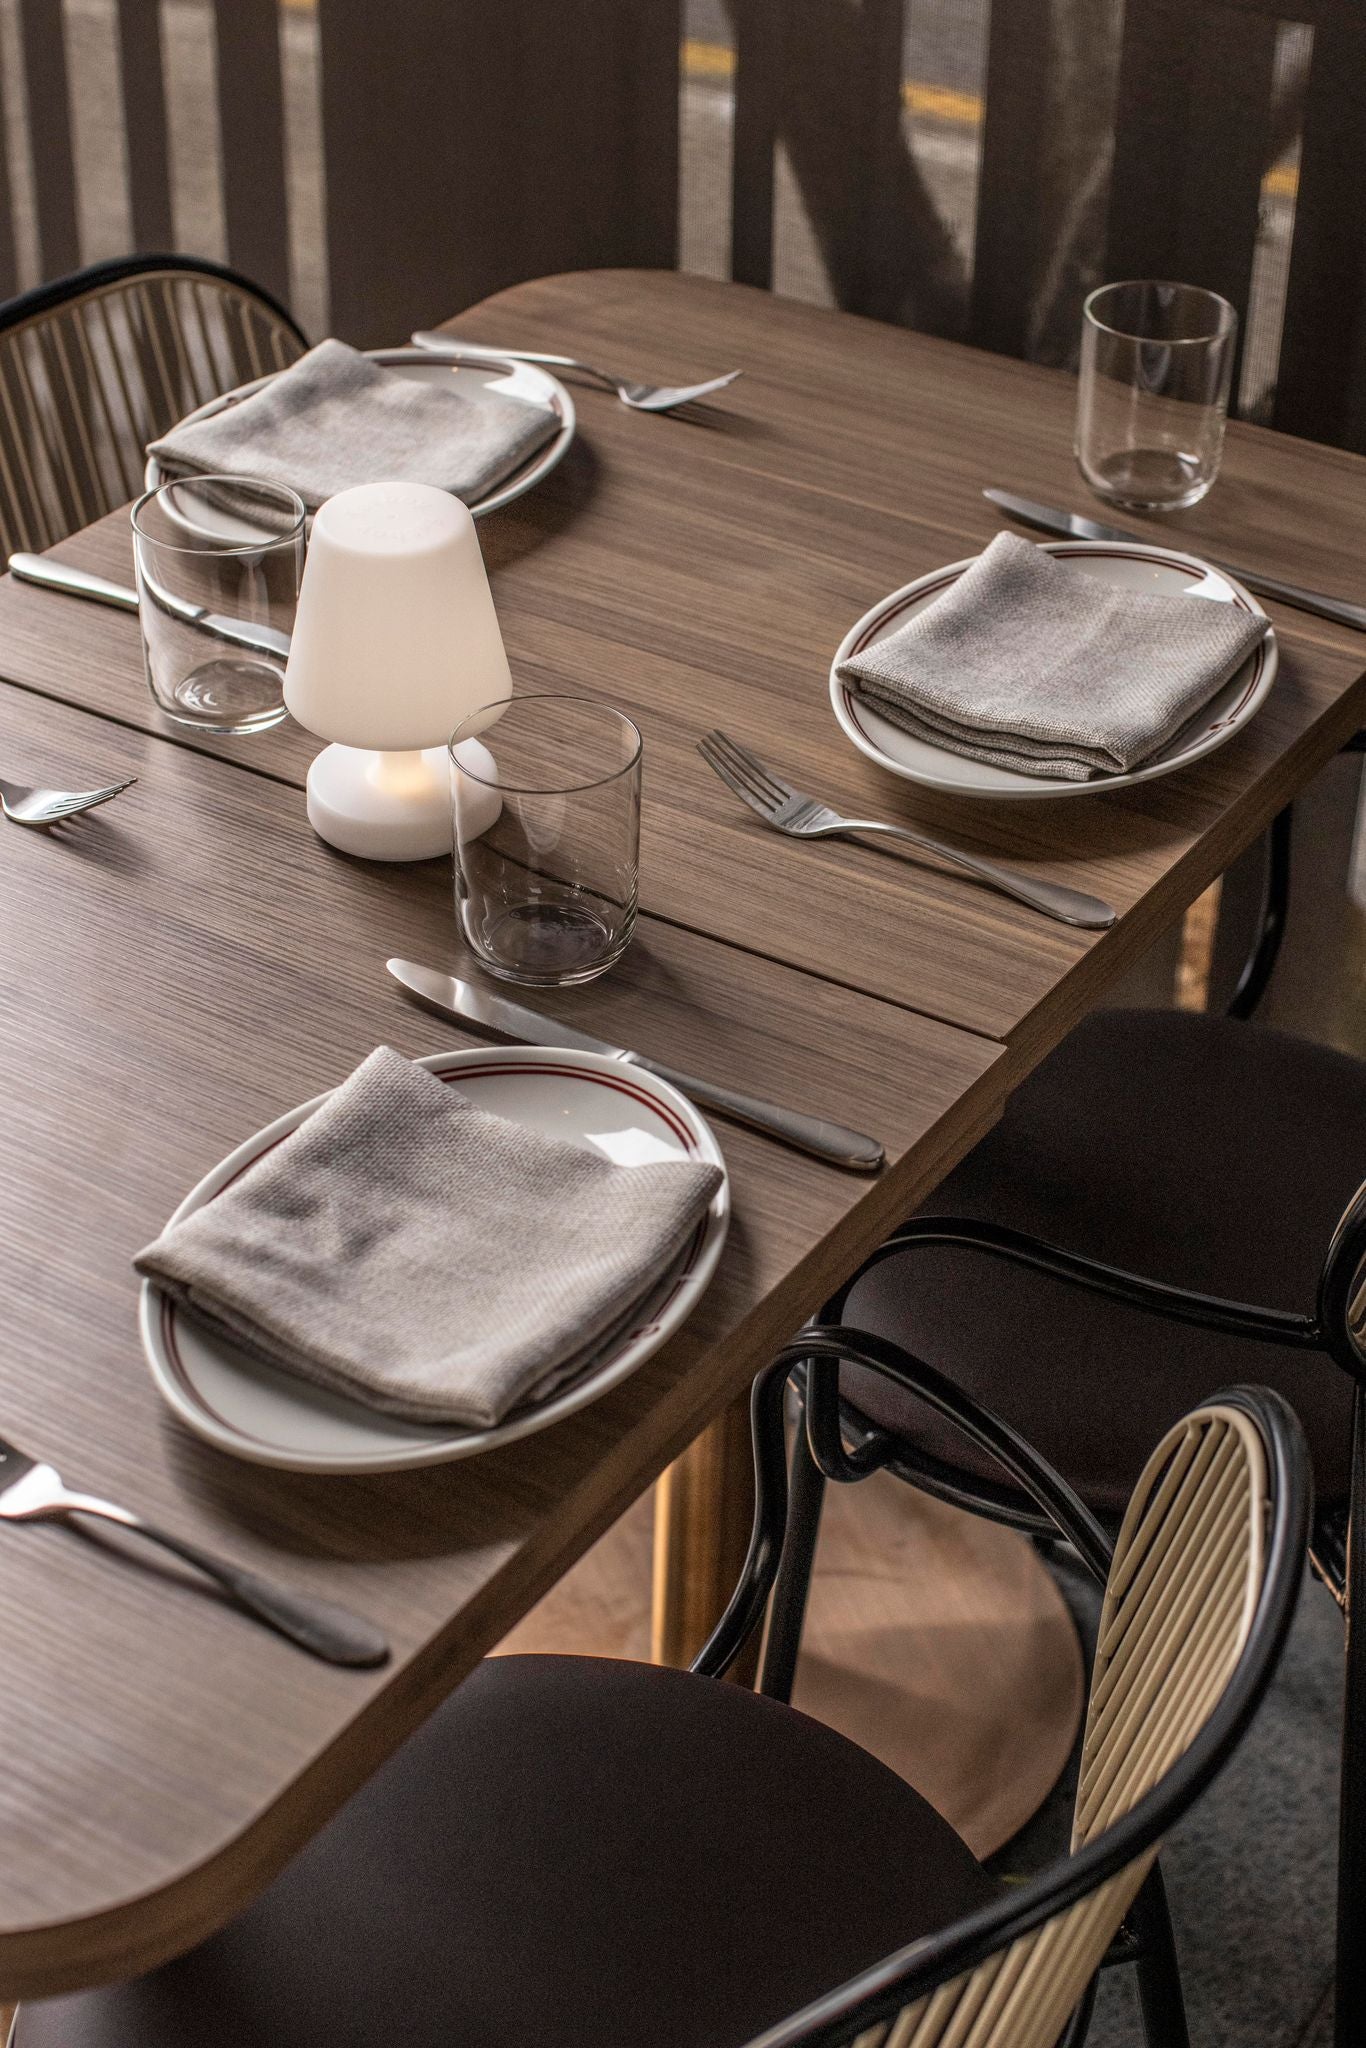 Piper Dining and Bar Chairs at Sasso Italiano by Collectivus | DesignByThem